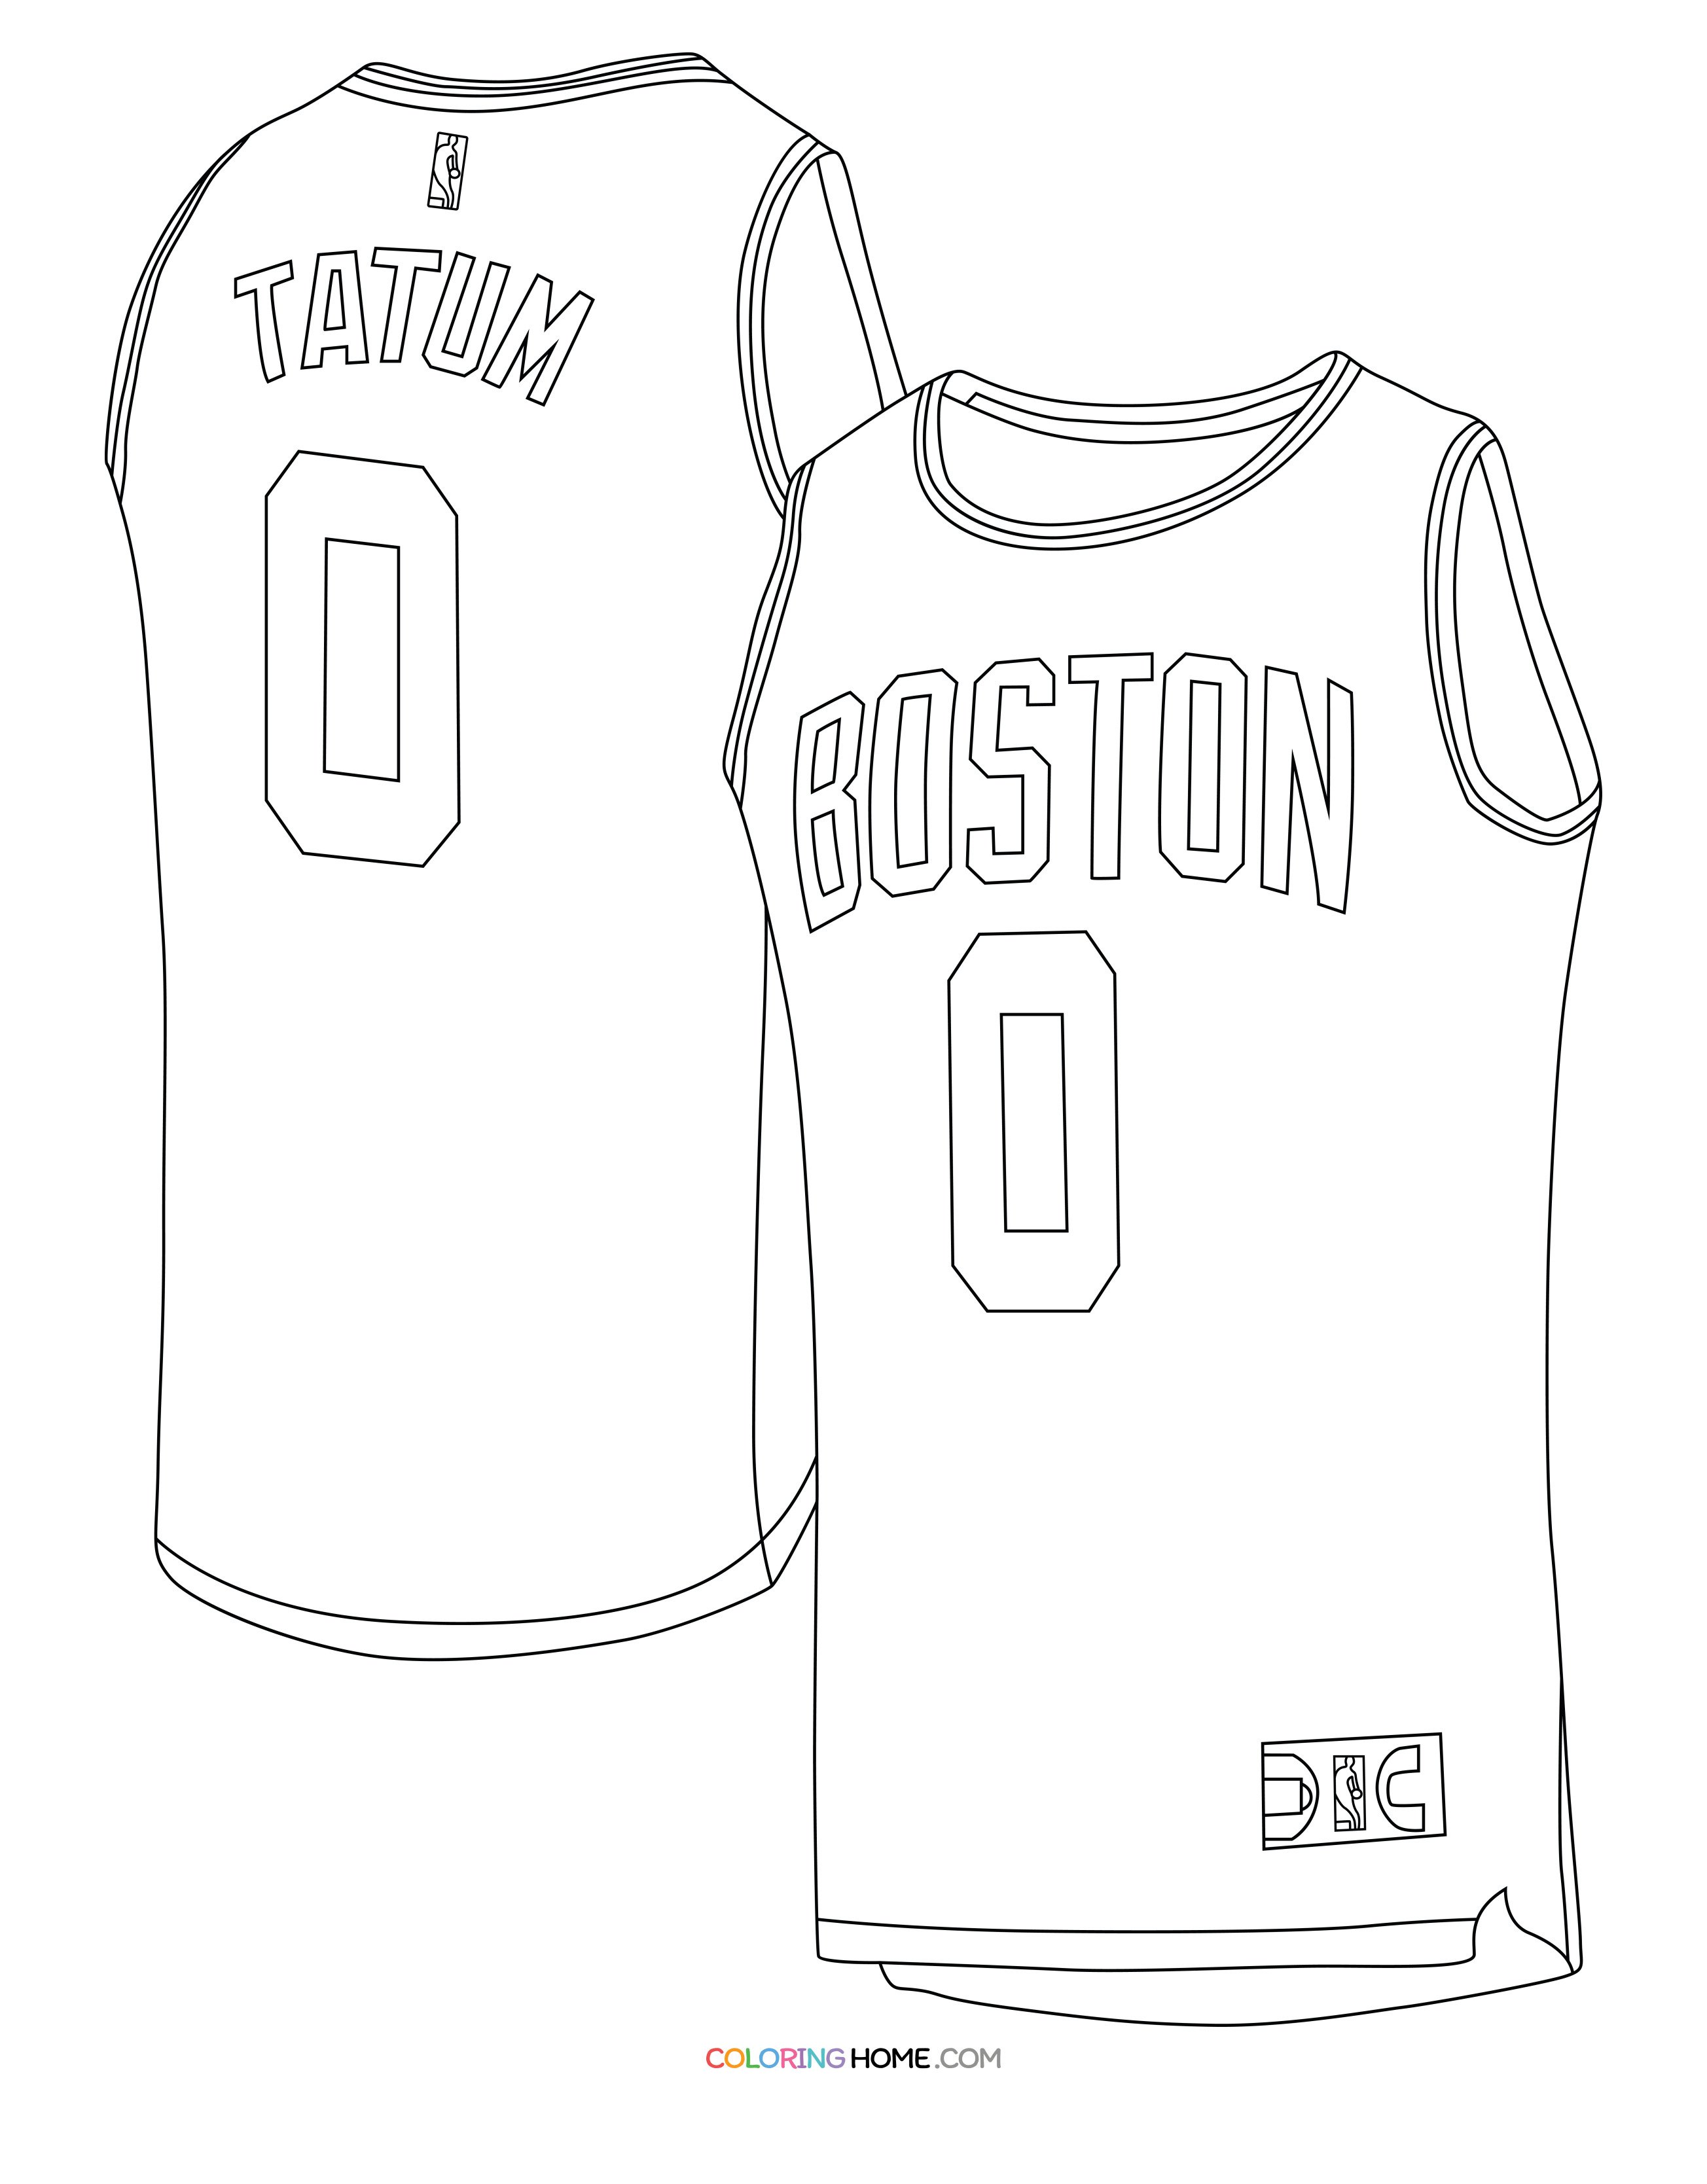 Jayson Tatum Coloring Pages - Coloring Home